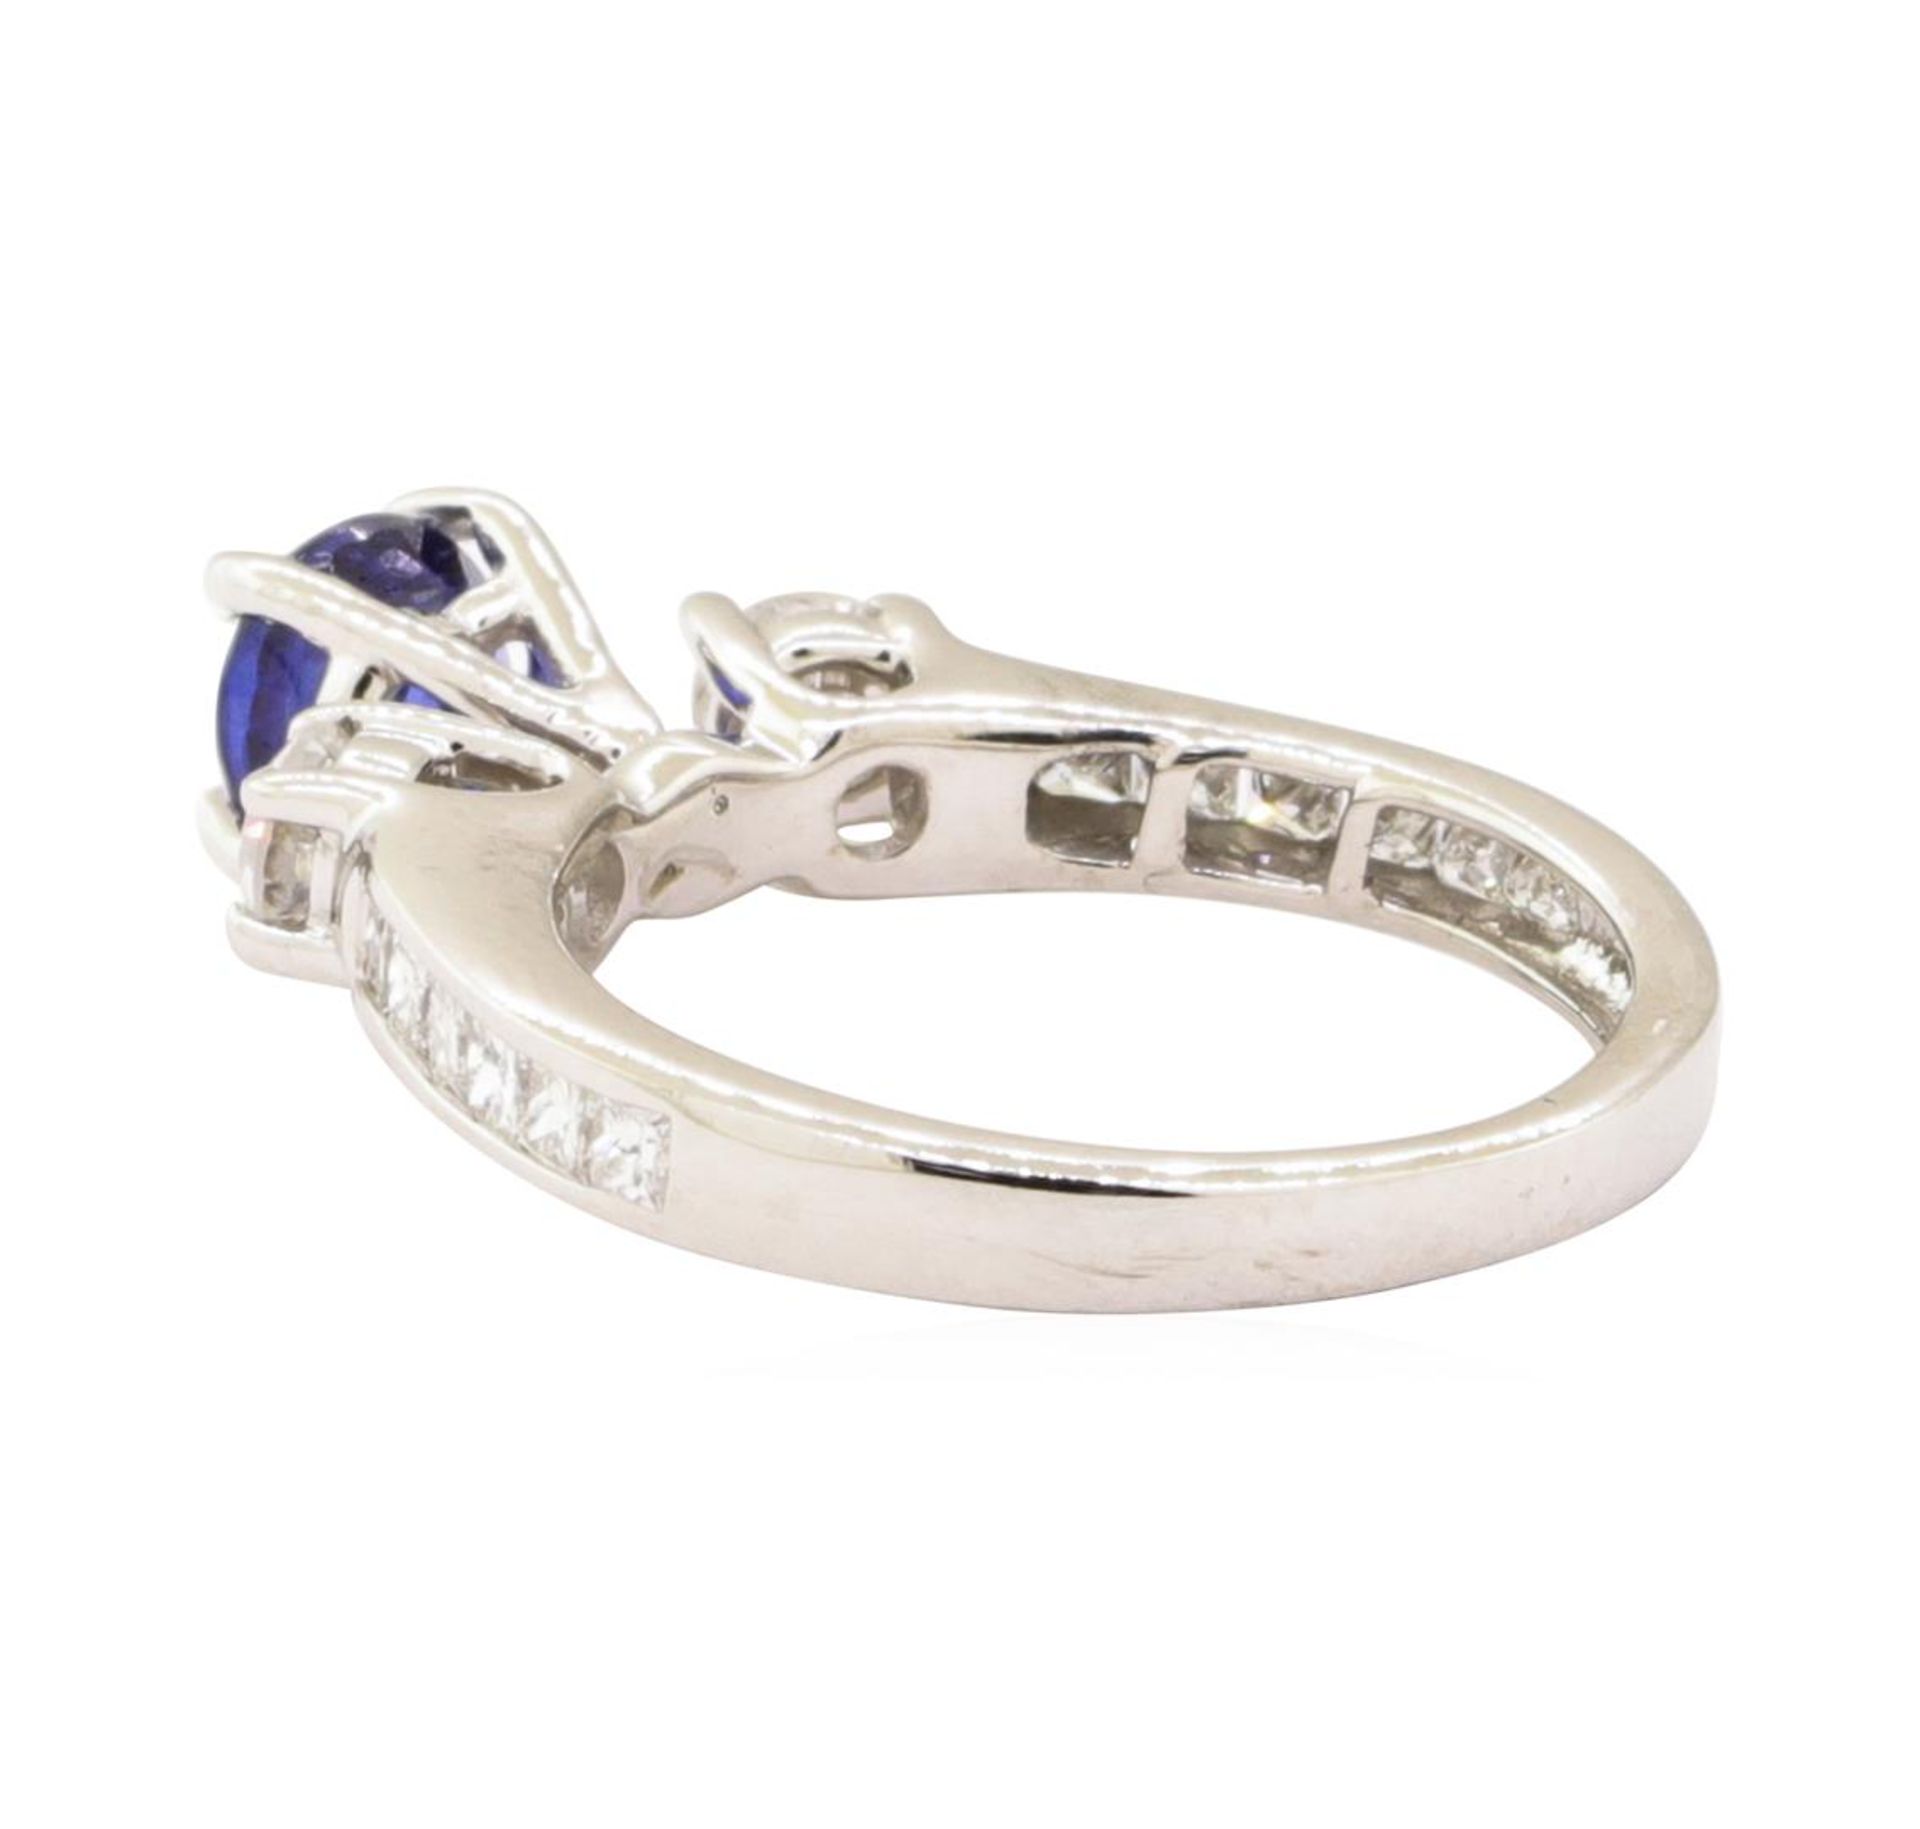 1.23 ctw Blue Sapphire and Diamond Ring - 14KT White Gold - Image 3 of 4